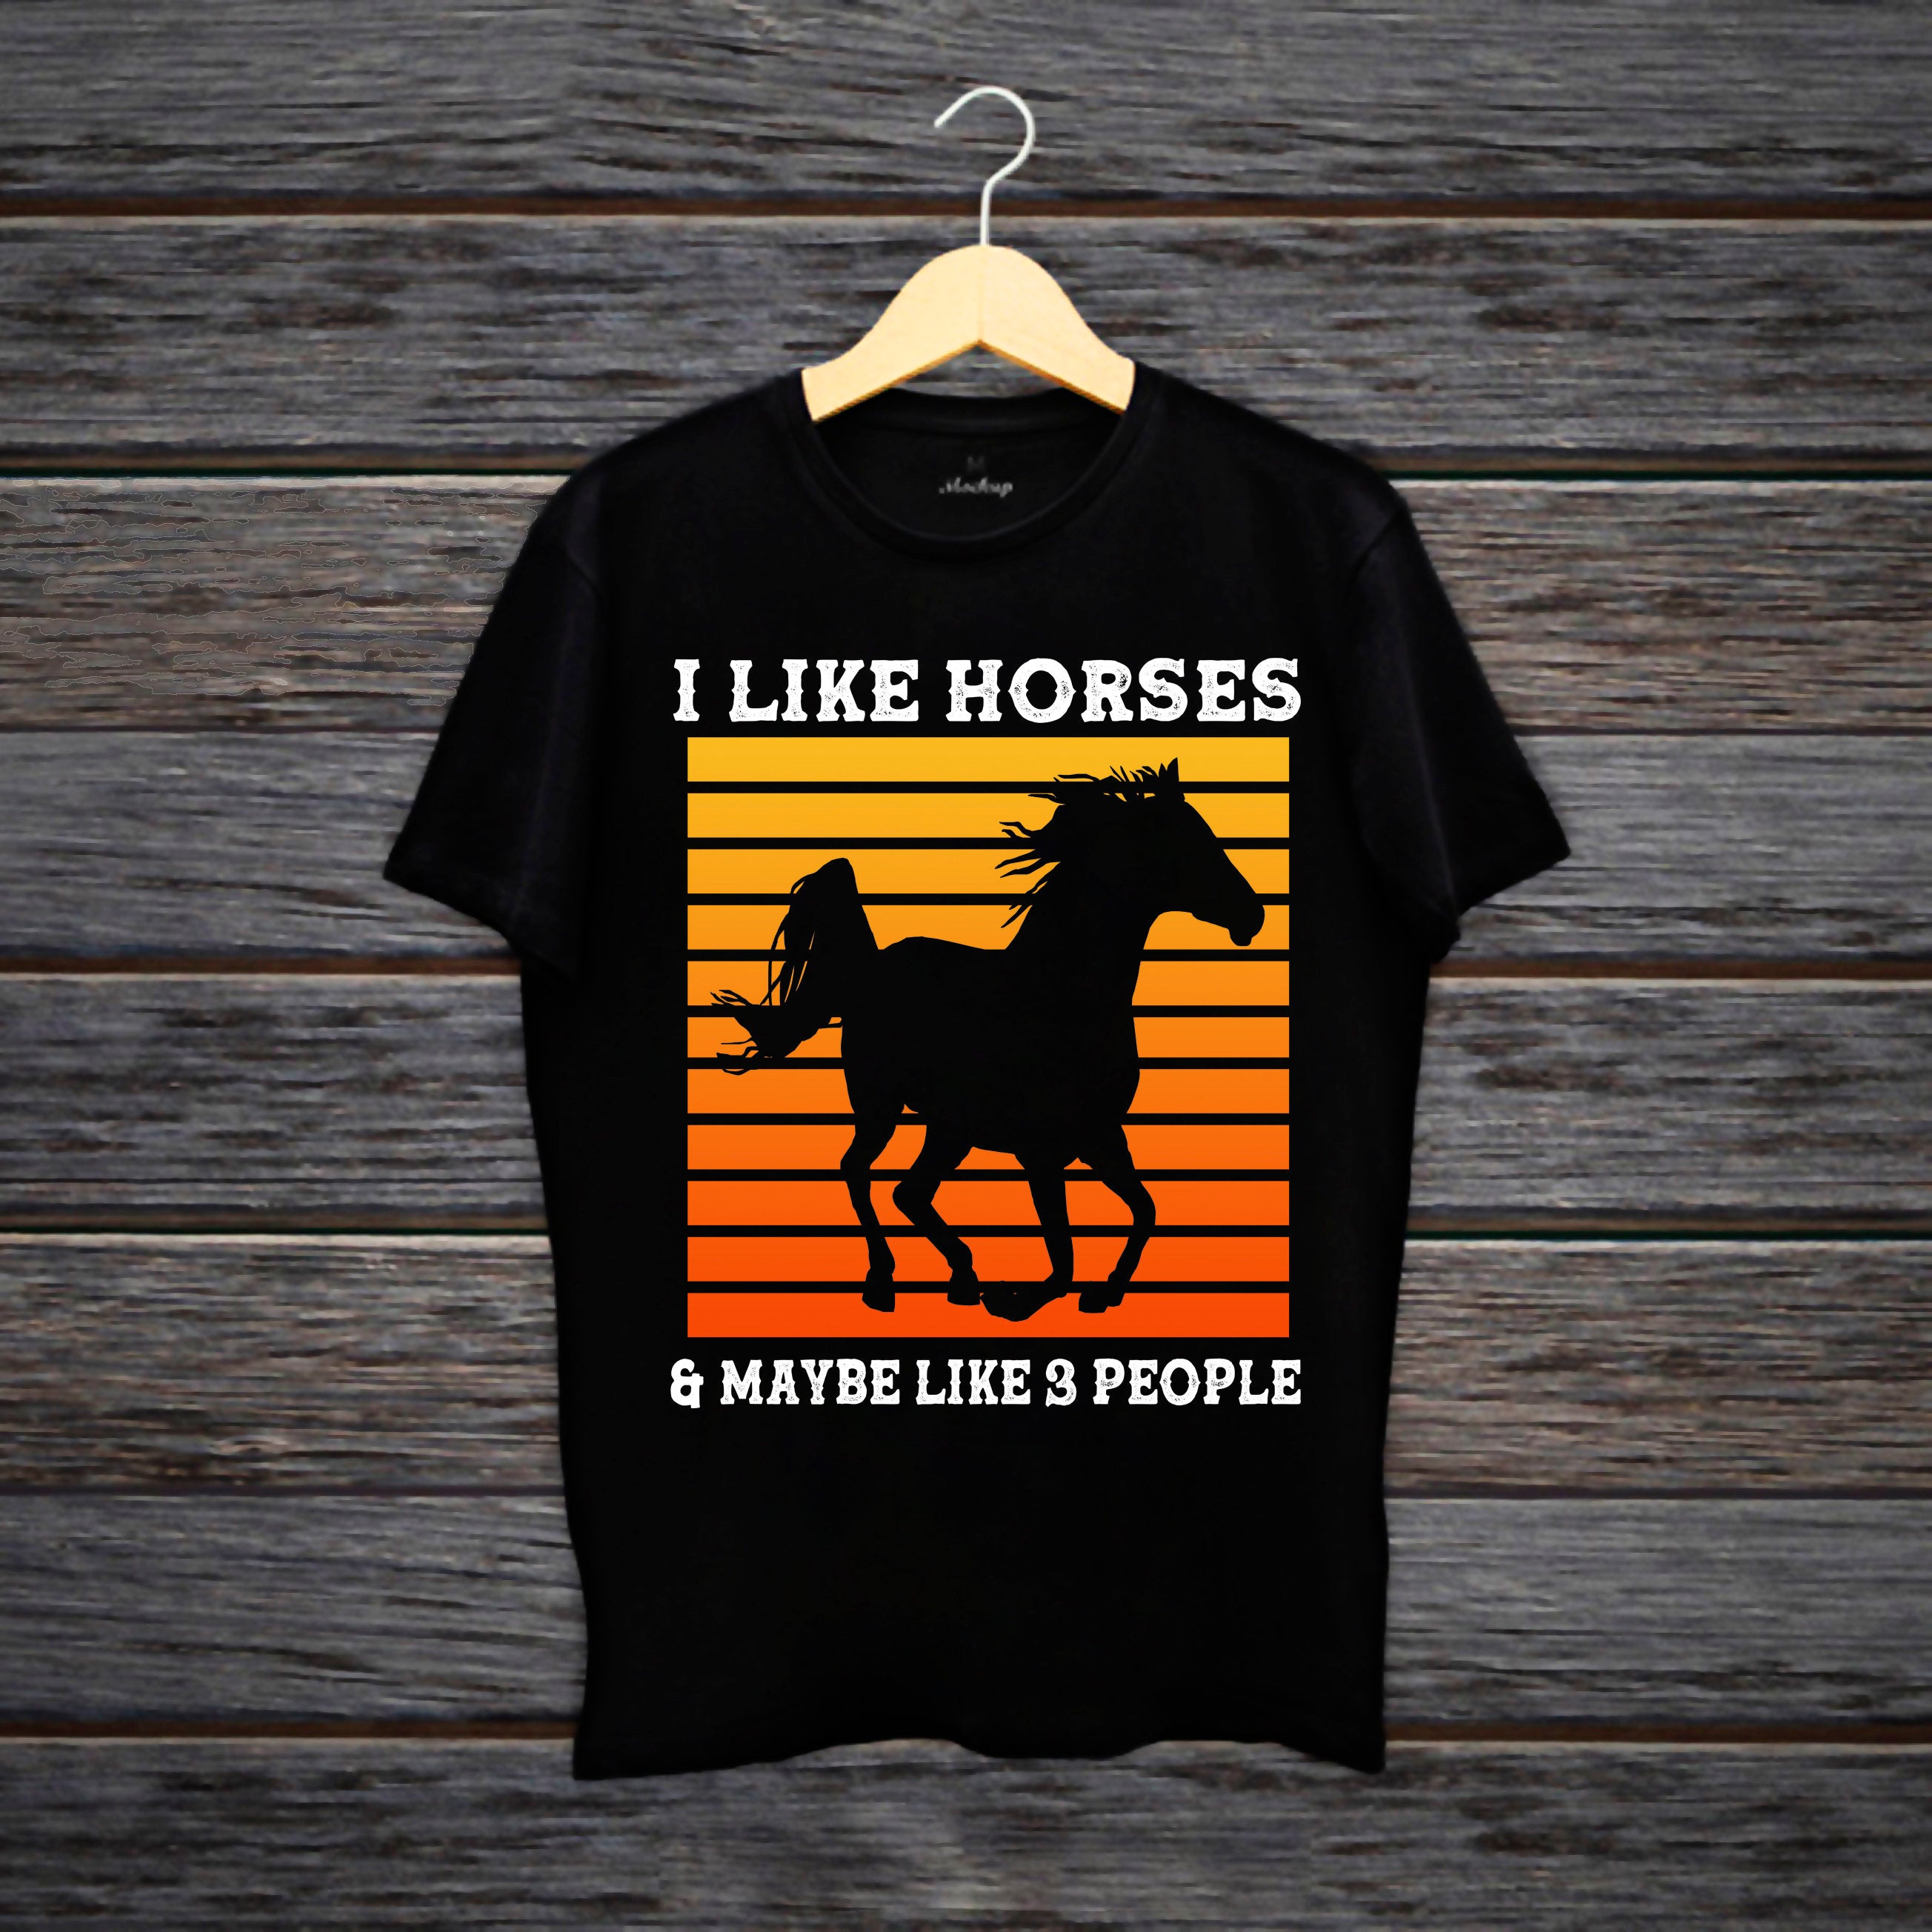 I Like Horses Dogs And Maybe 3 People Shirt, Horse Lover Shirt, Girls Horse Shirt,Gift For Horse Owner,Farmer Shirt,Horse Gift,Horse T Shirt - plusminusco.com